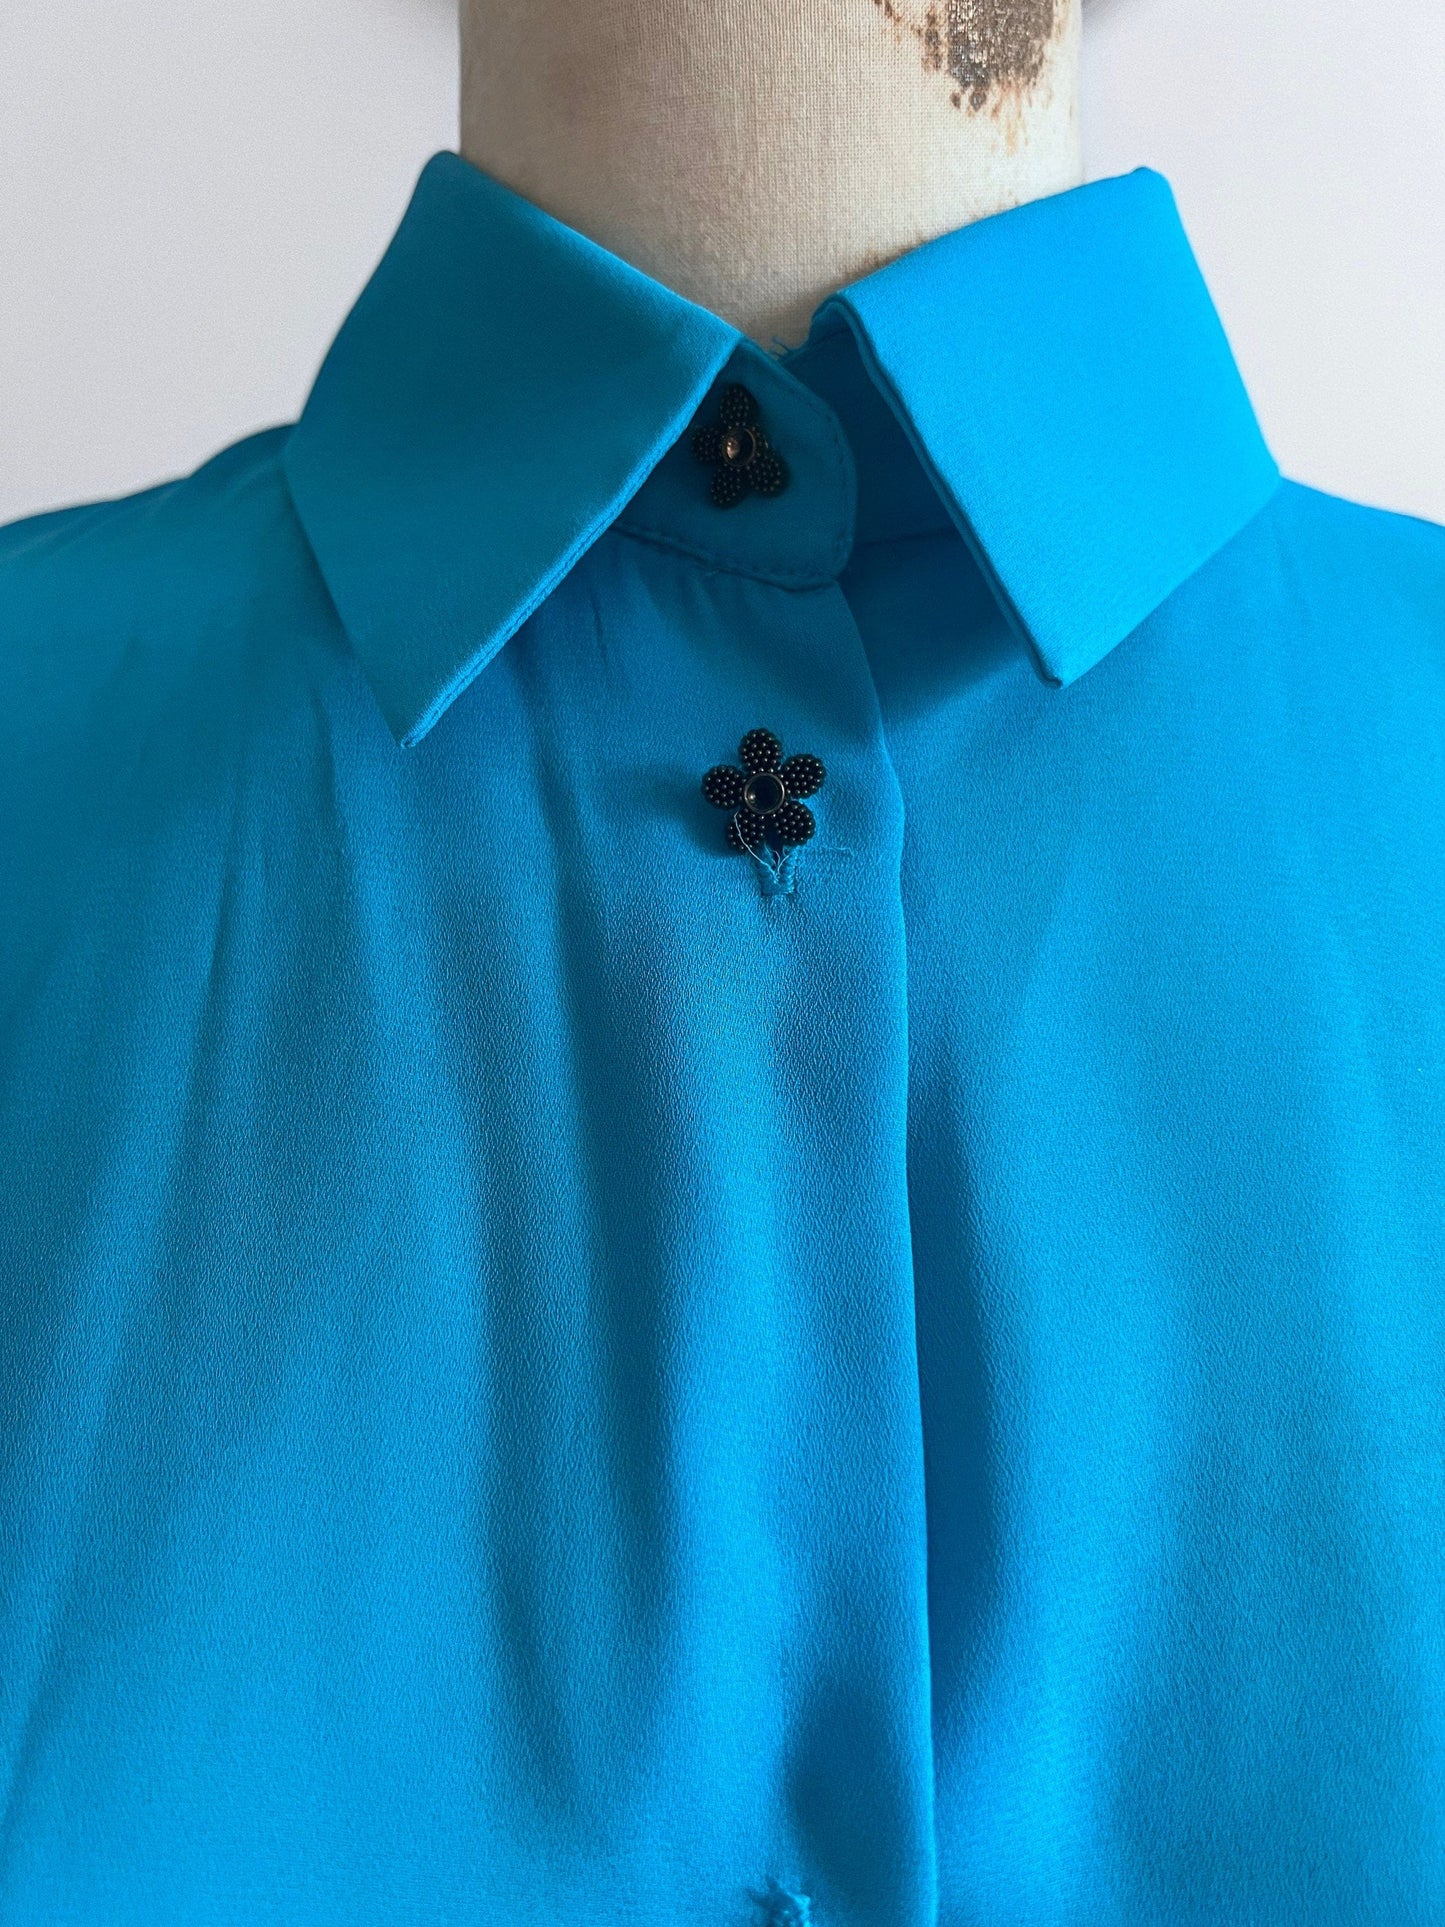 Vintage Turquoise Blouse - long sleeves flower button front high neck Semi Sheer Shirt - UKM